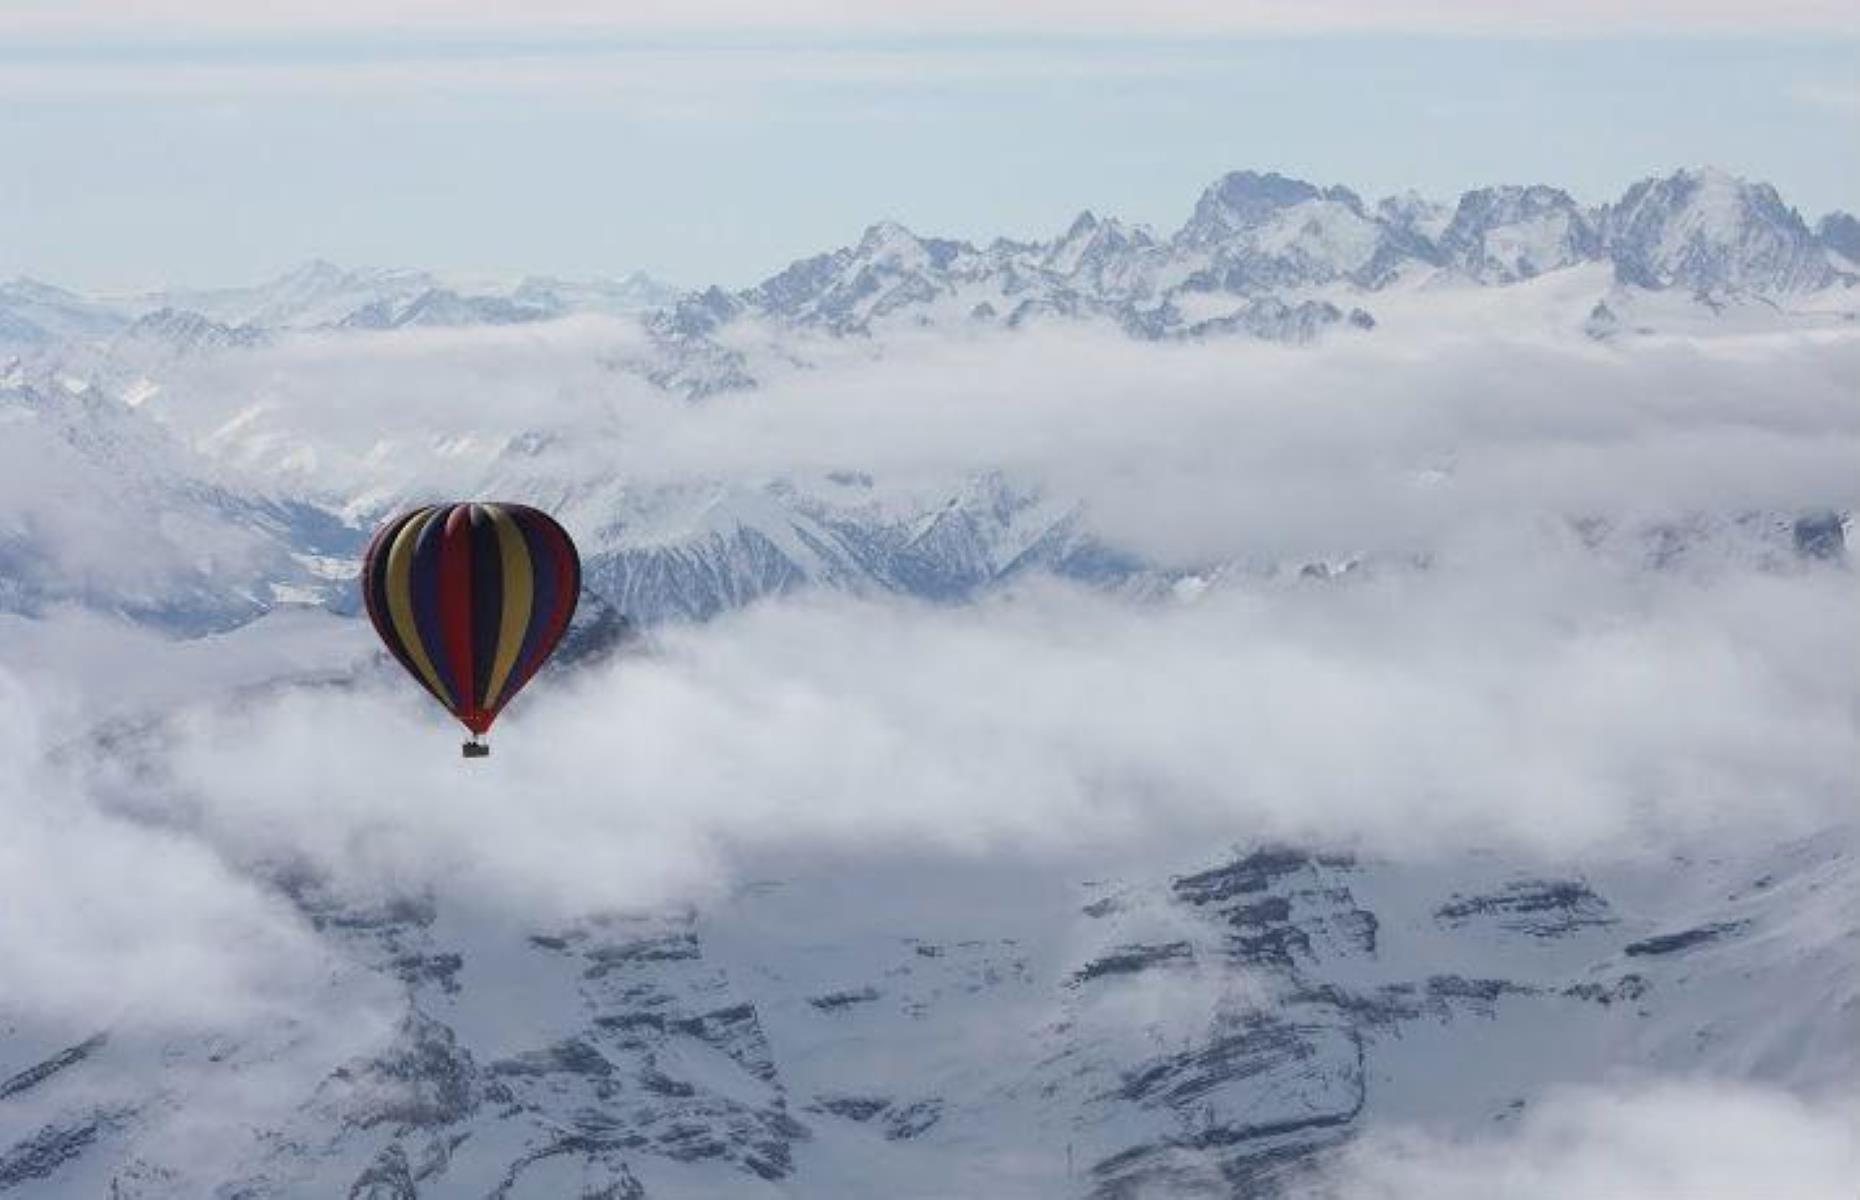 Marvel at Mount Everest from a balloon